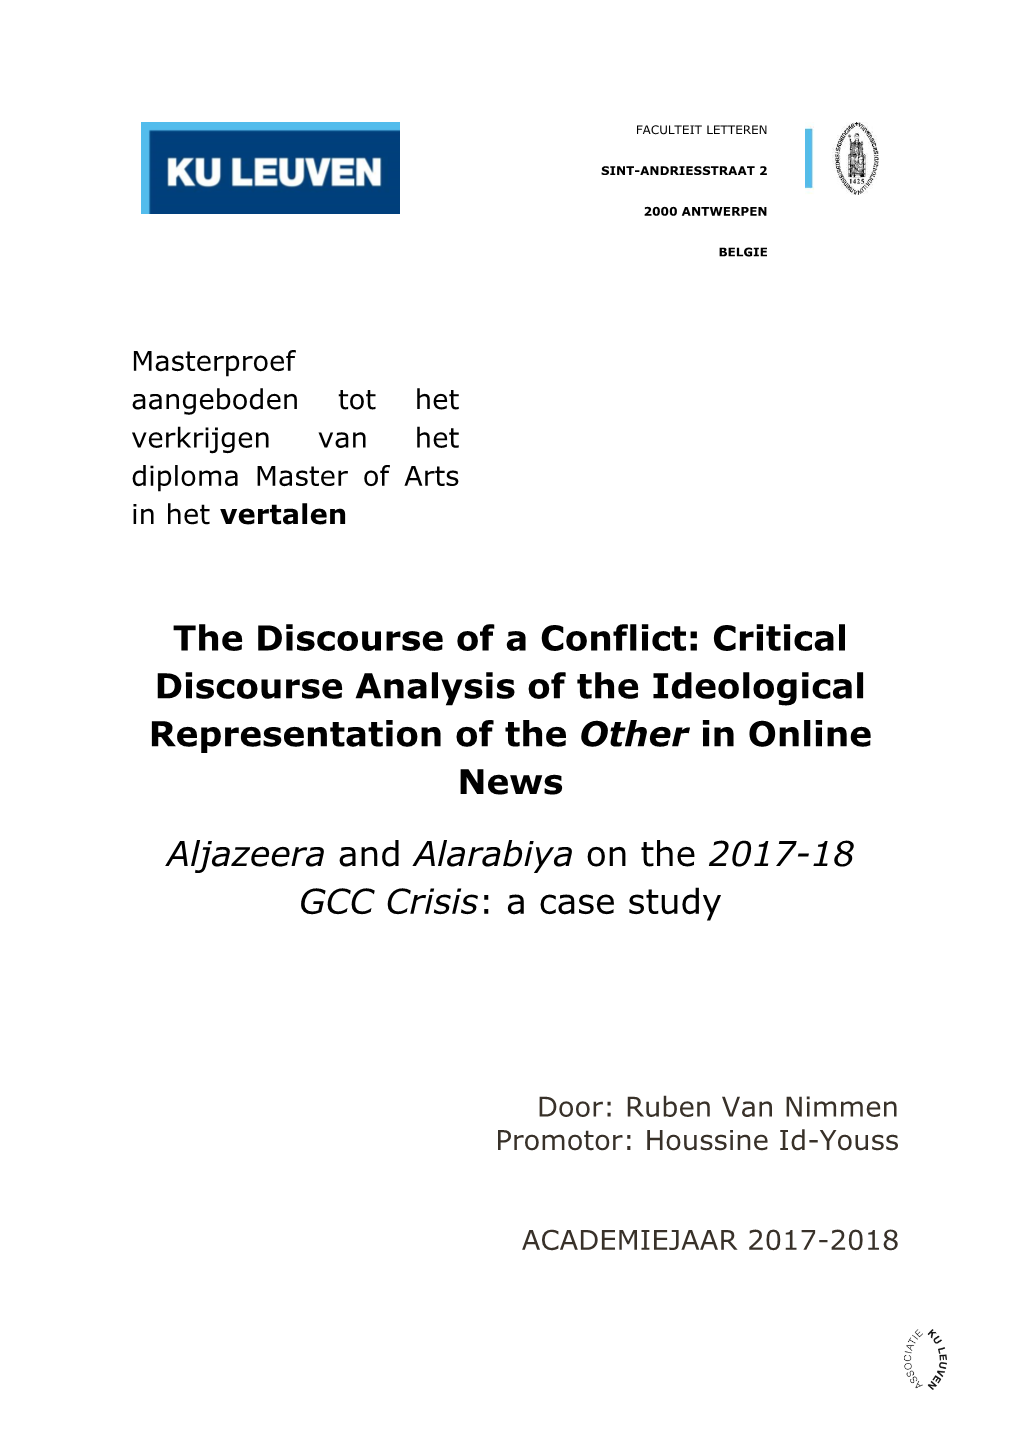 The Discourse of a Conflict: Critical Discourse Analysis of the Ideological Representation of the Other in Online News